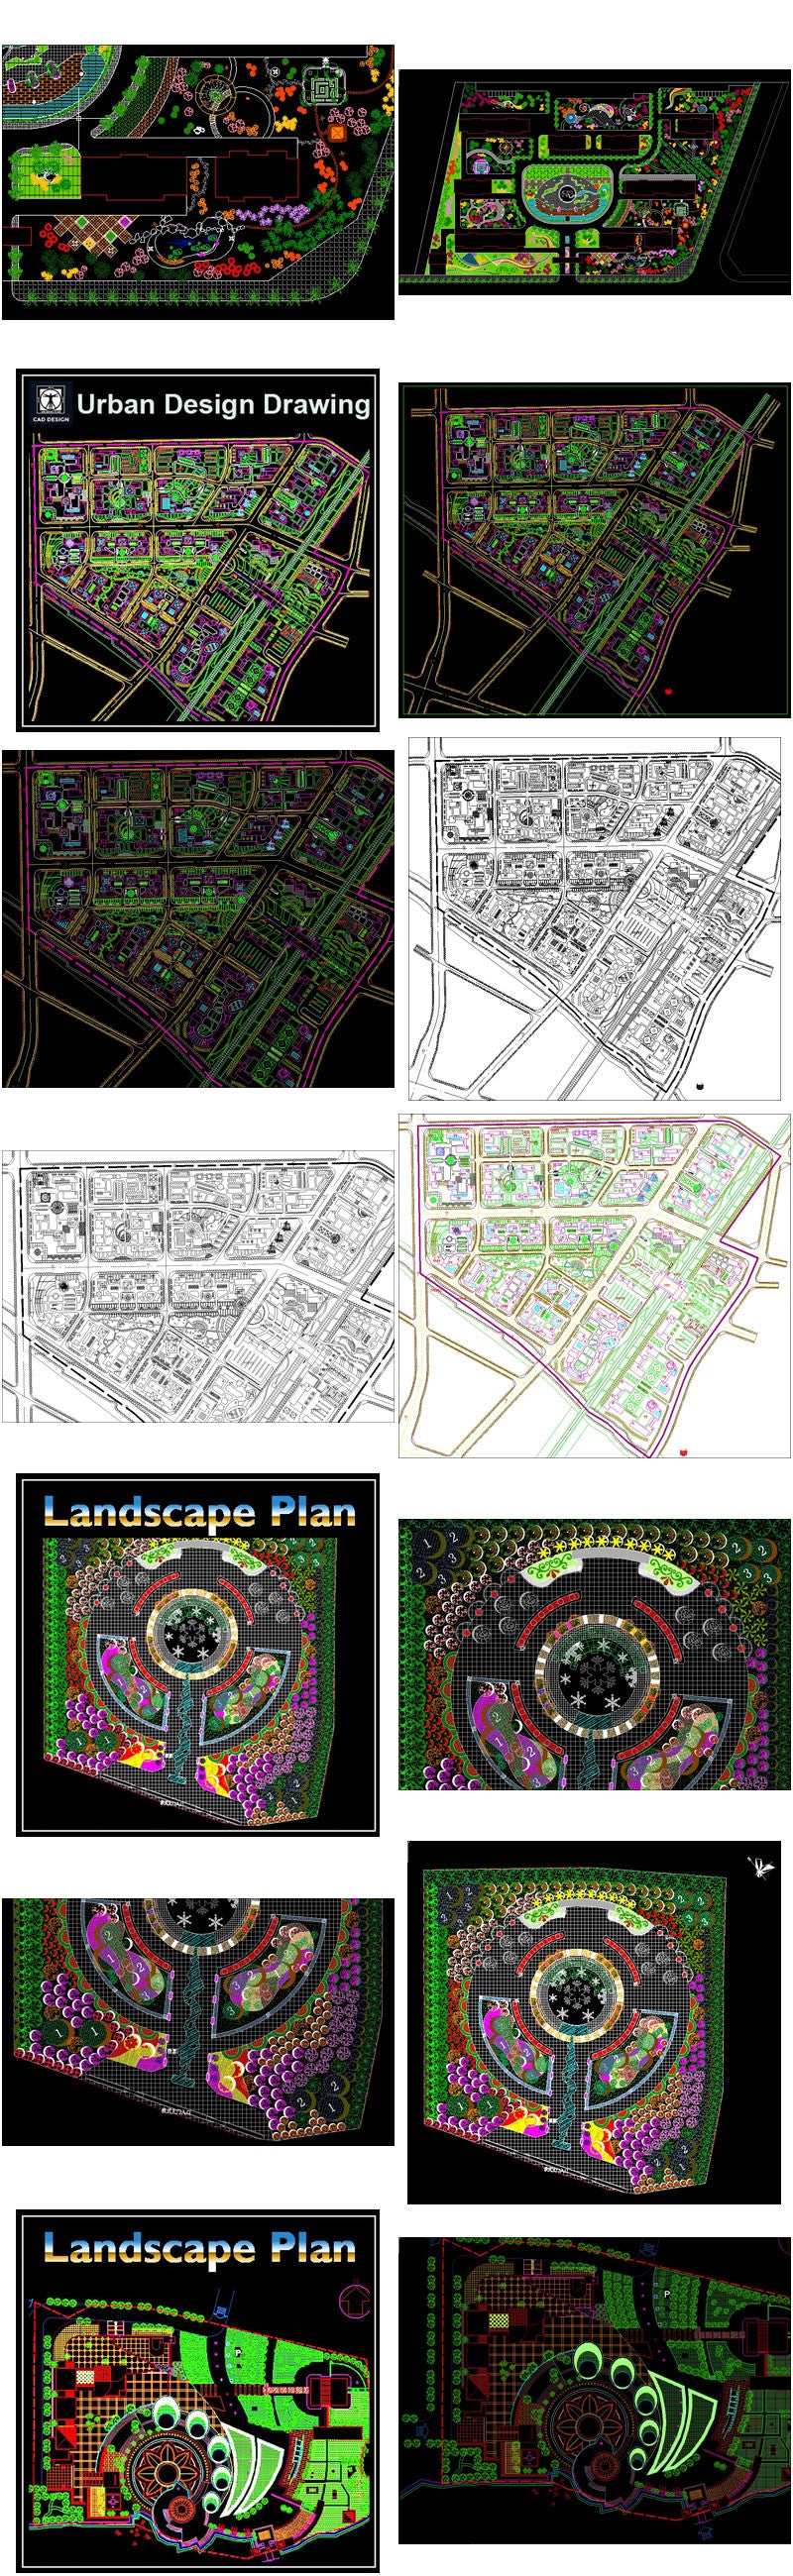 【All Urban Design CAD Drawings Collections】(Best Recommanded!!)